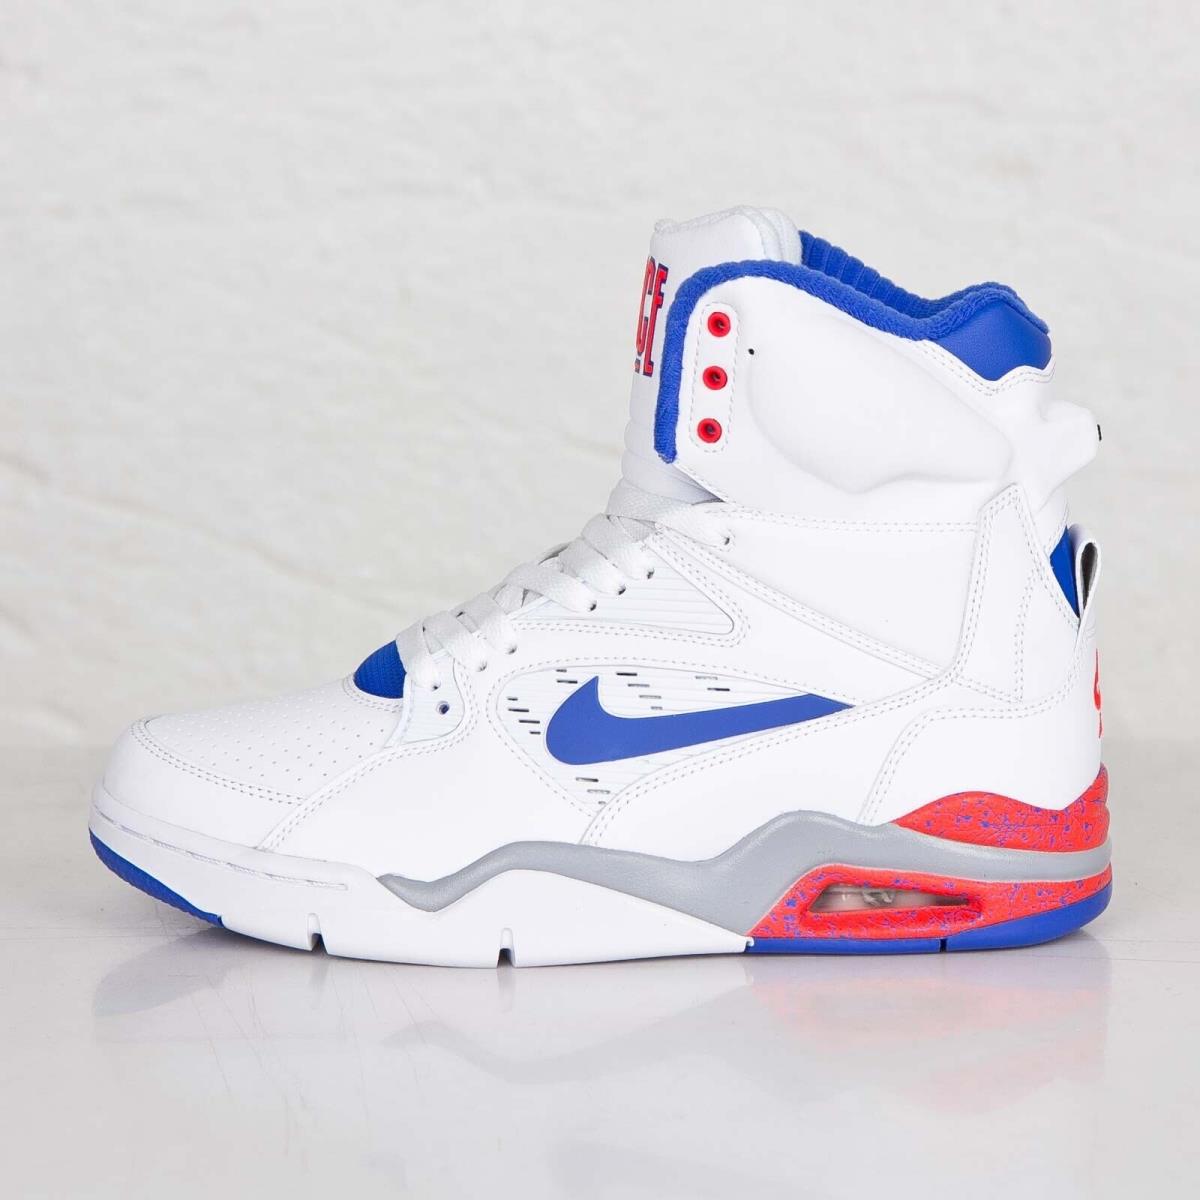 Nike Air Command Force Ultramarine Size 8.5 684715-101 White/lion Blue-bright | - Nike shoes Air Command - White SporTipTop